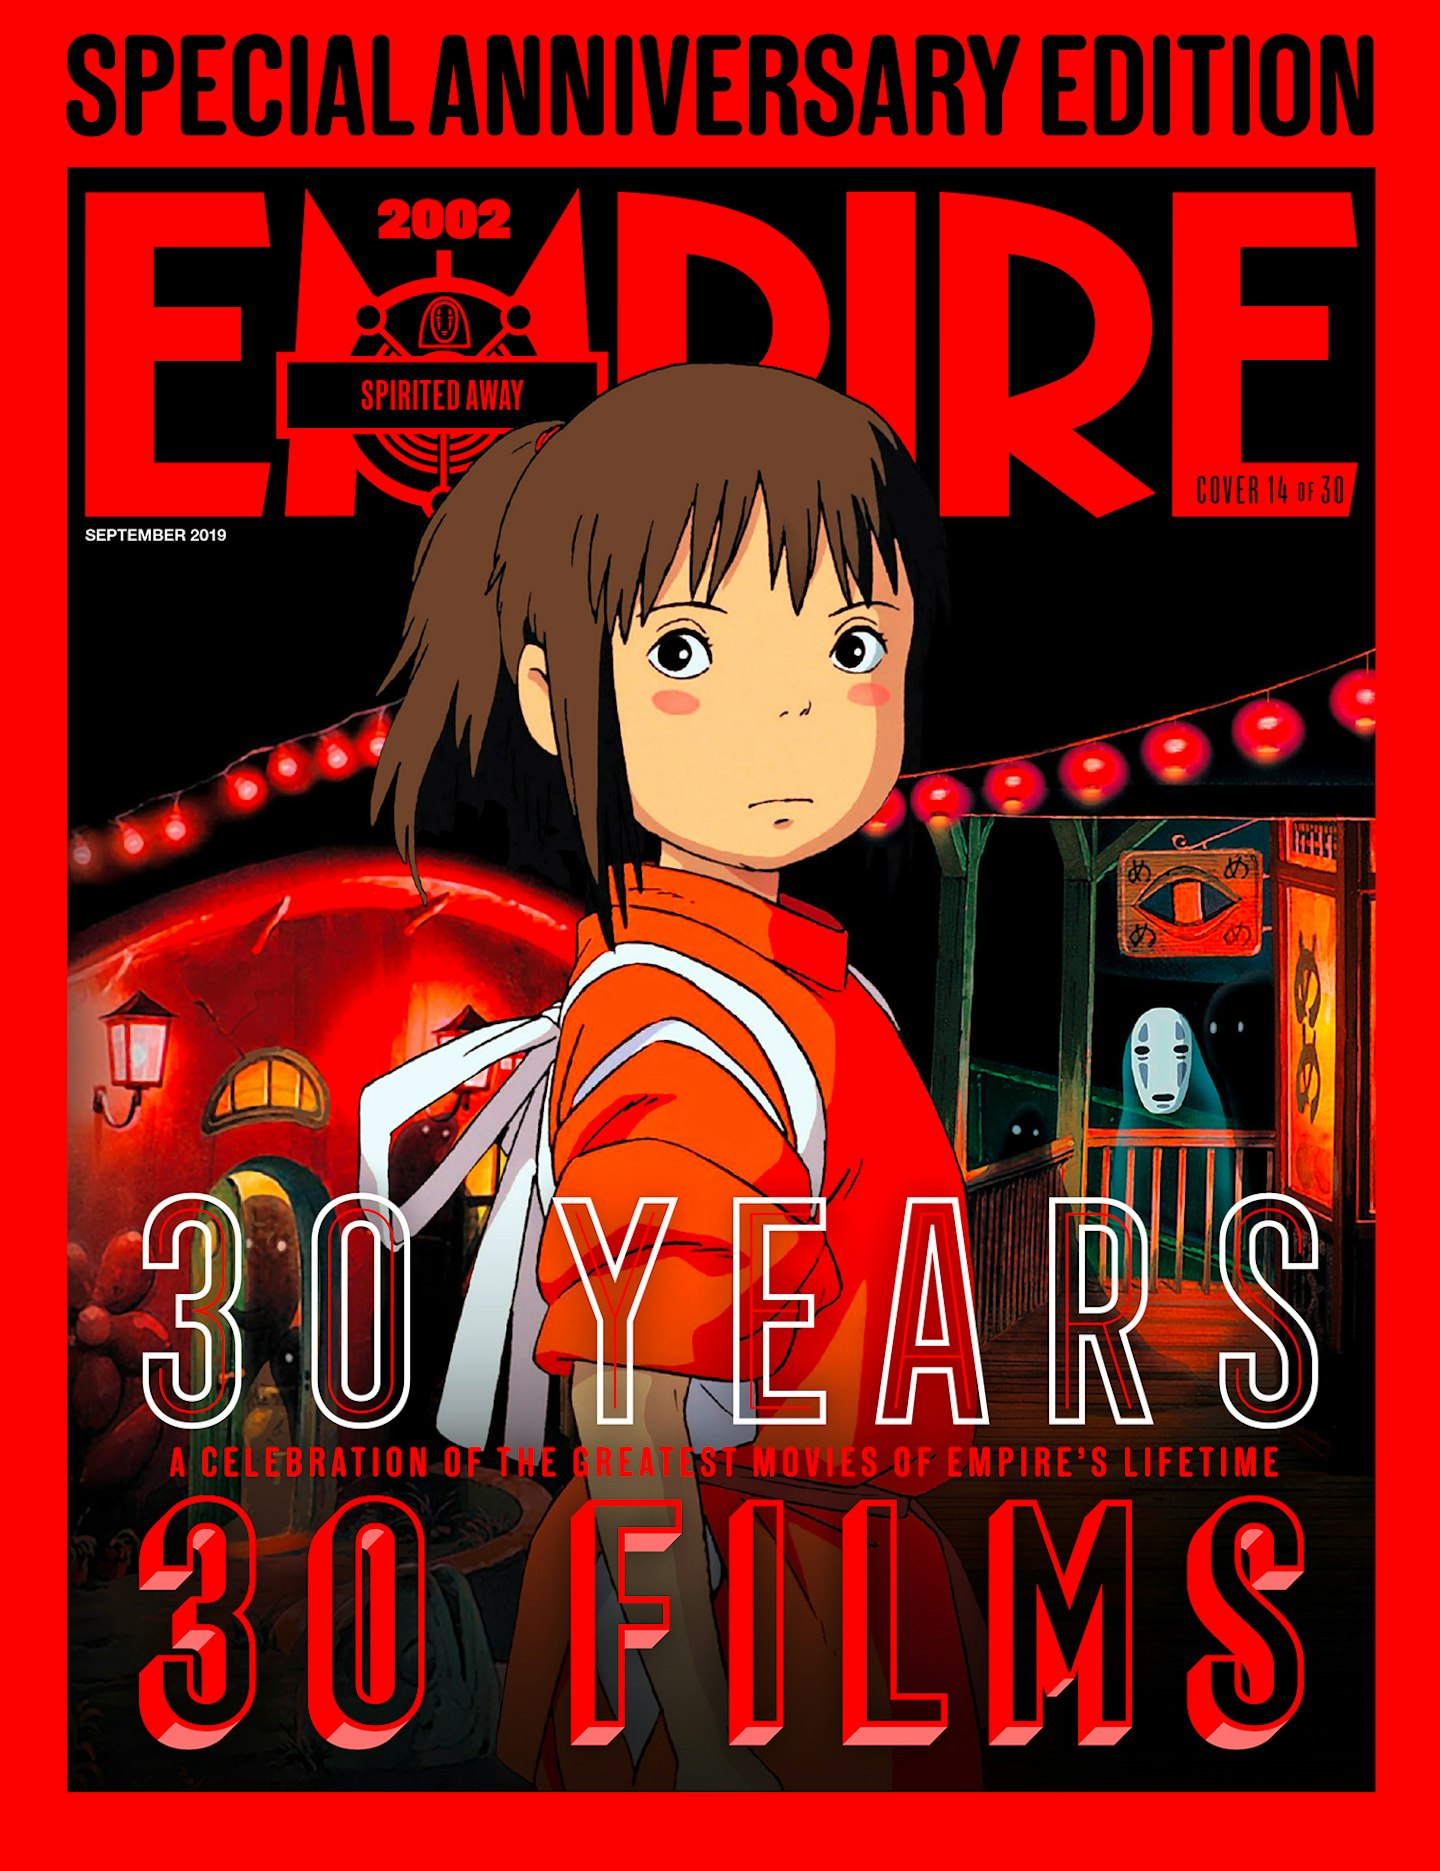 Empire's 30th Anniversary Edition Covers – Spirited Away